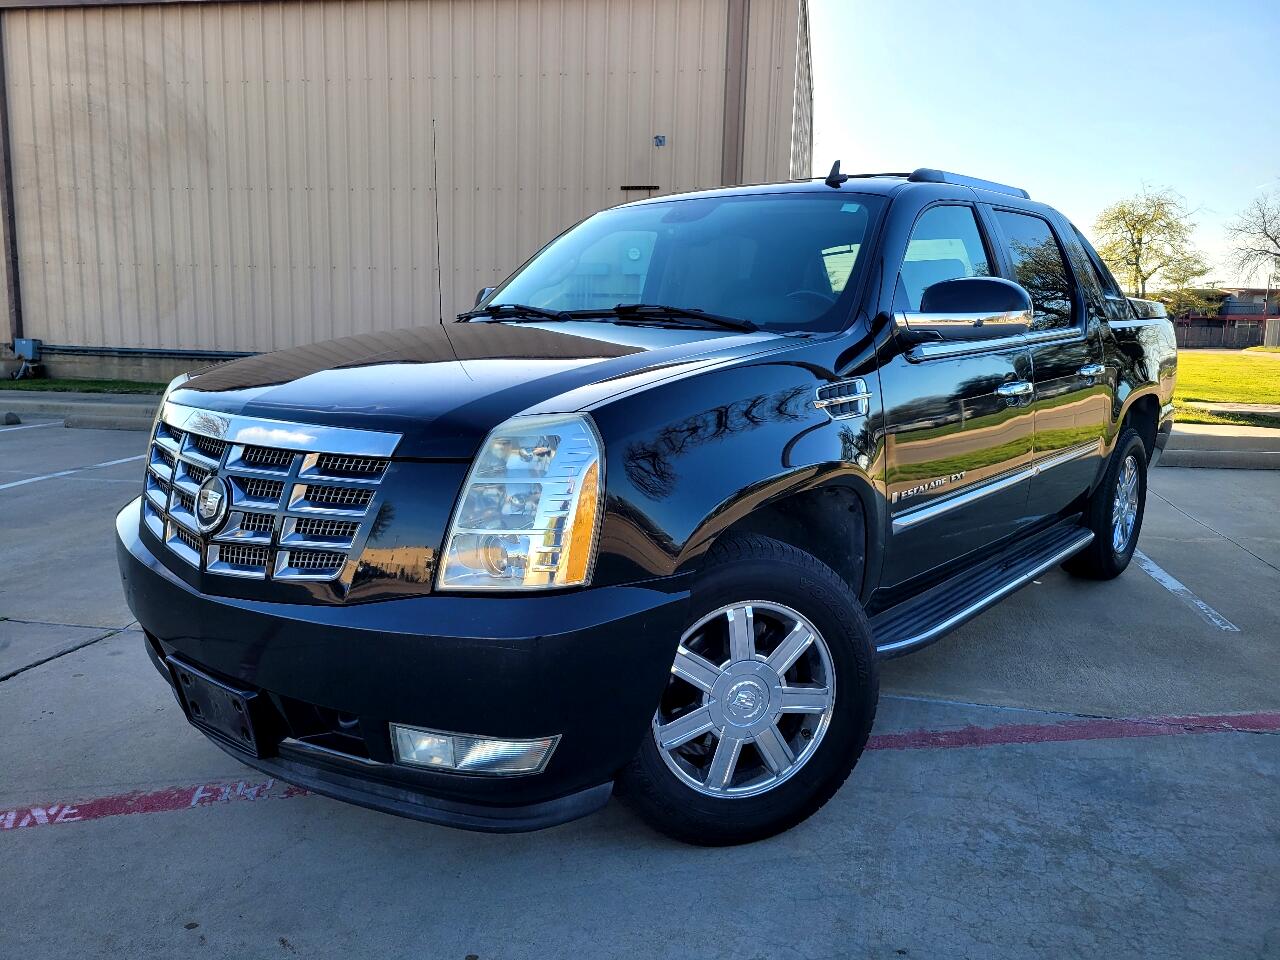 Used Cadillac Escalade Ext's in Corinth, Texas for sale - MotorCloud